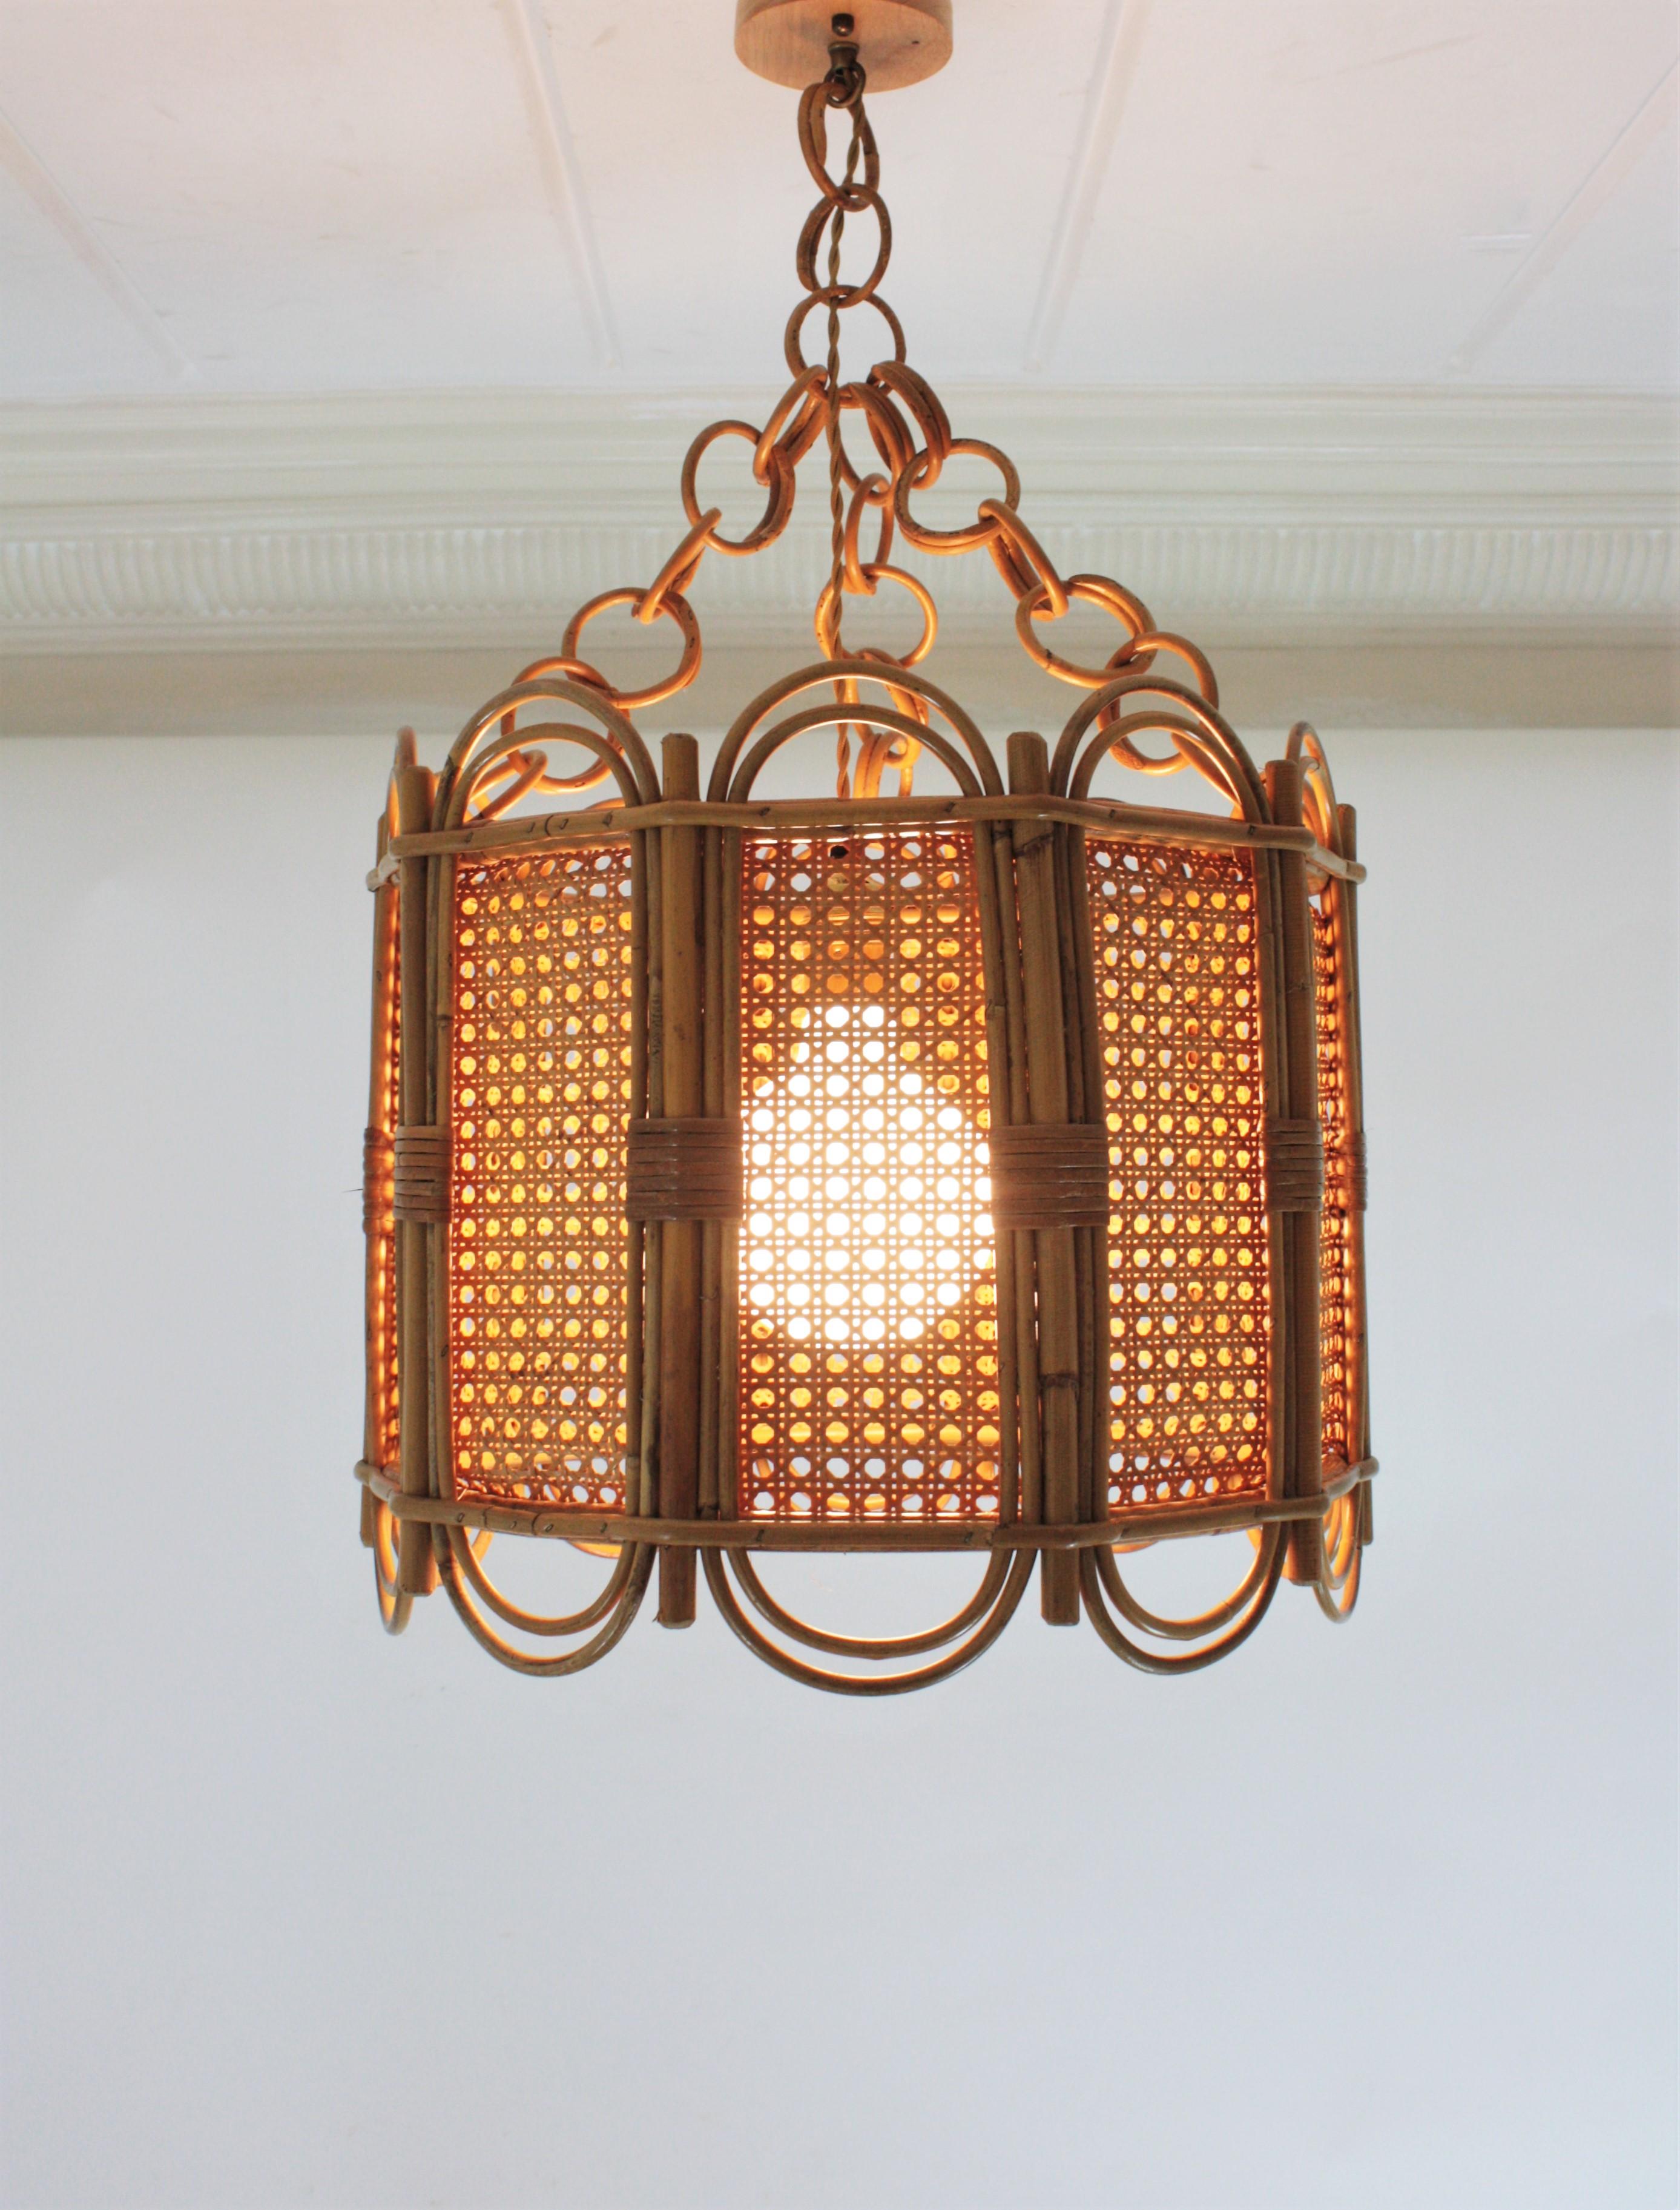 Rattan Wicker Weave Large Drum Pendant Light or Lantern, 1960s In Good Condition For Sale In Barcelona, ES